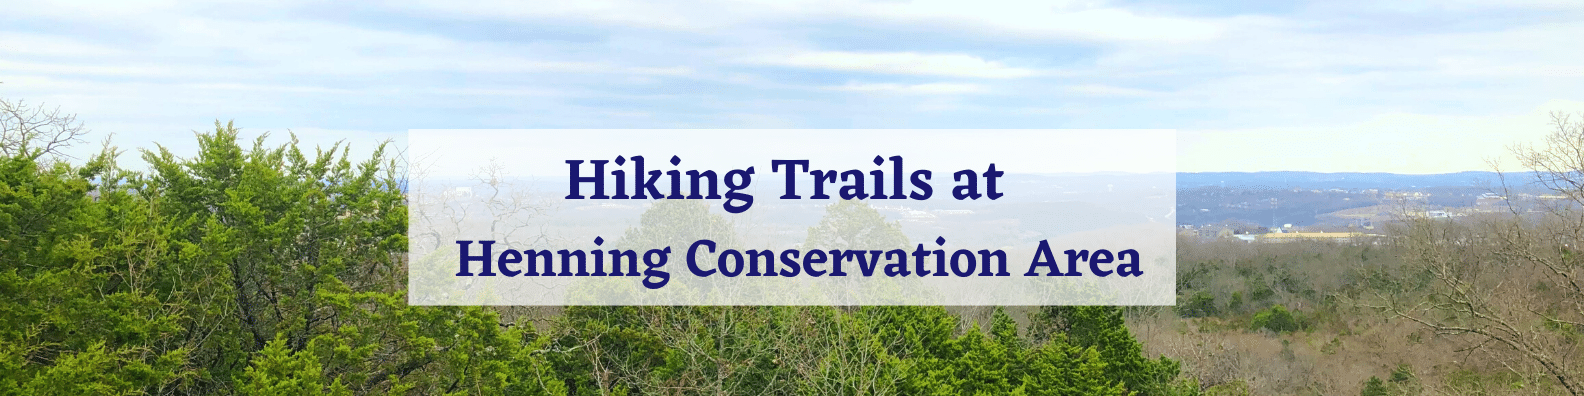 Branson hiking trails at Henning Conservation Area